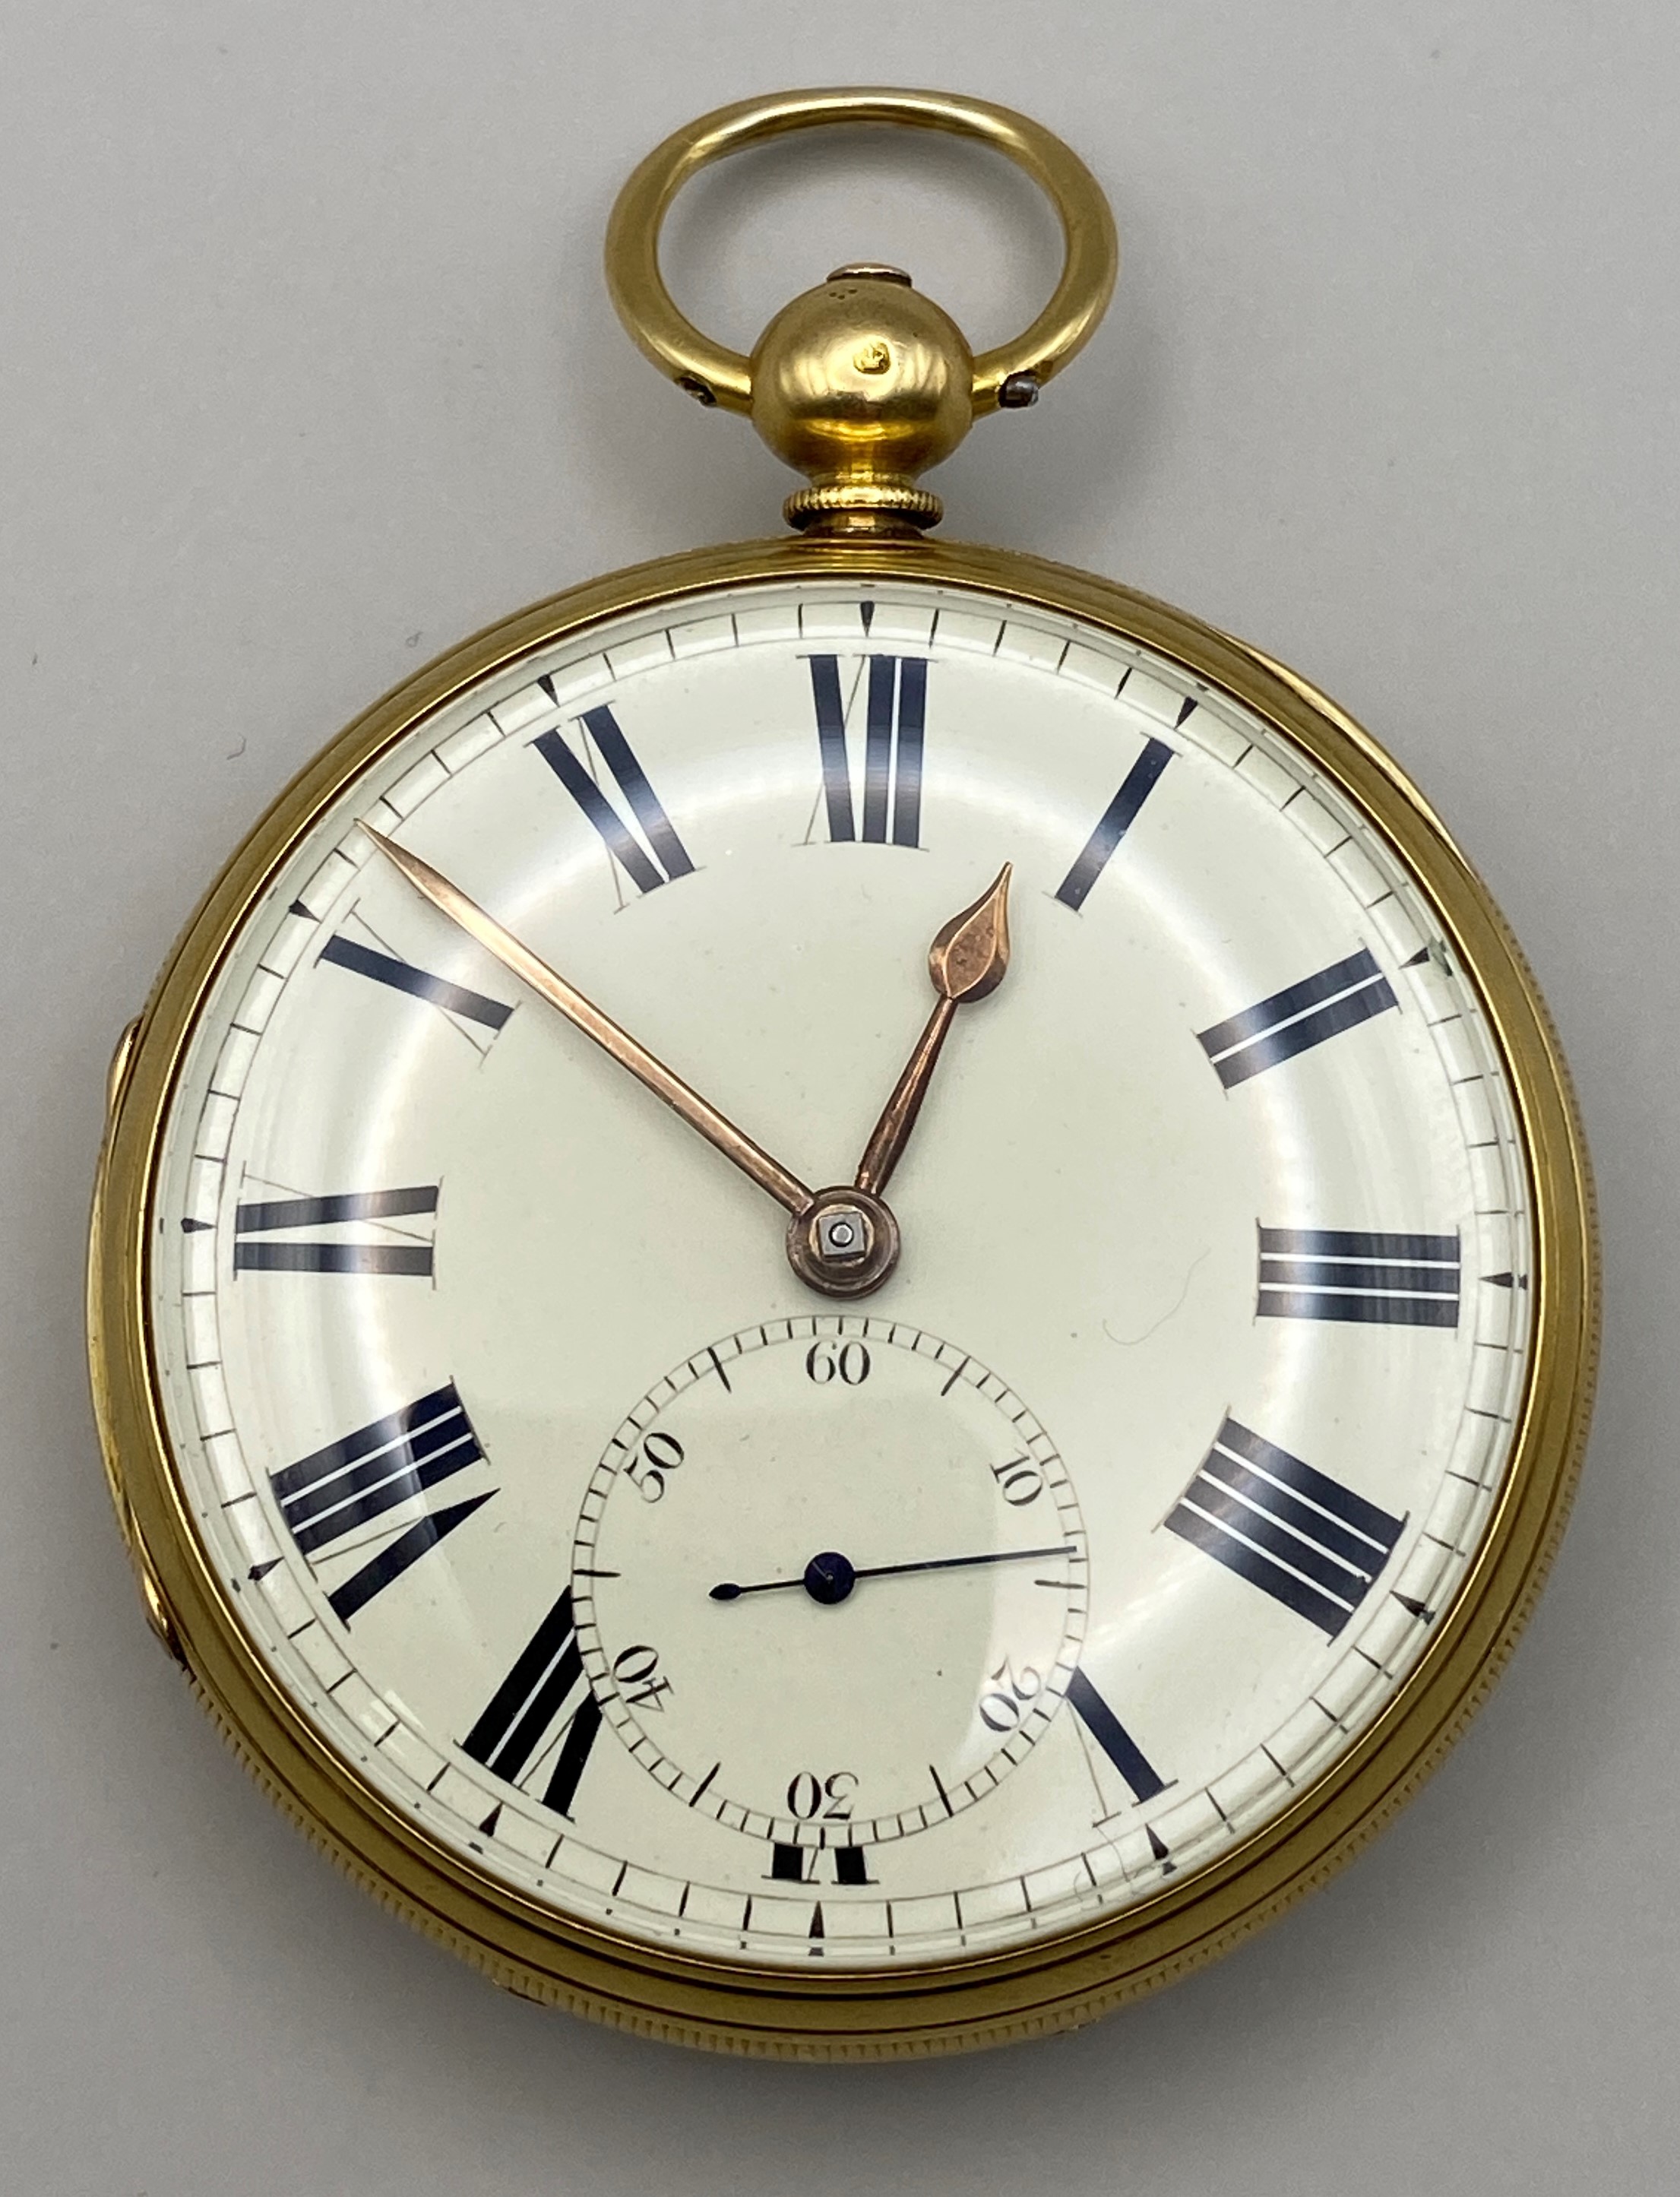 18ct Gold Fusee Pocket Watch by Gammon of Birmingham '1685', No.3584. - Image 7 of 48